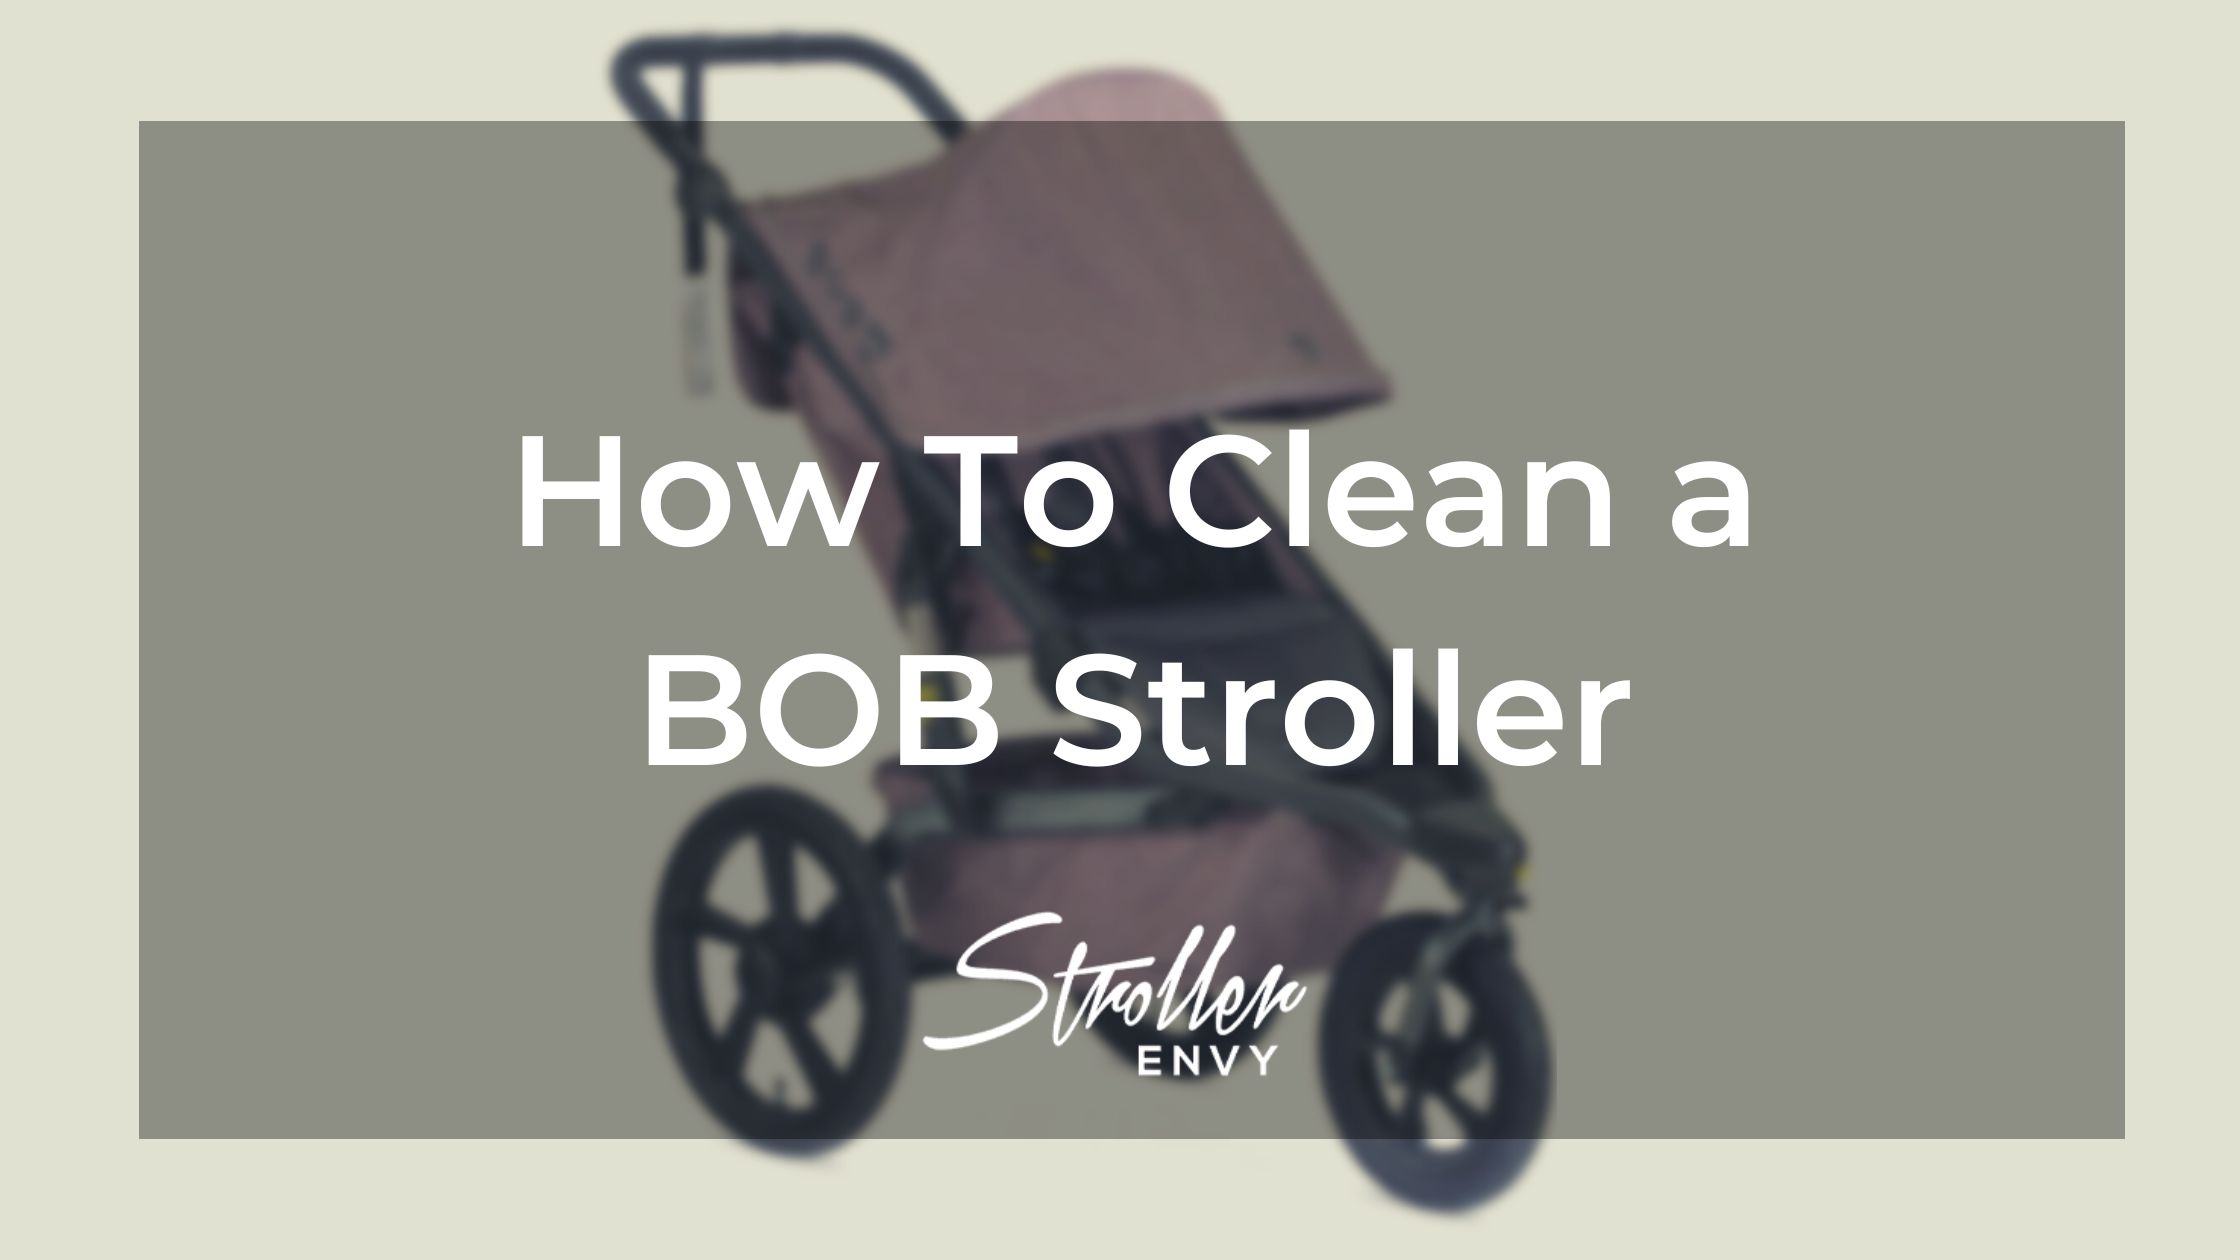 How To Clean A BOB Stroller